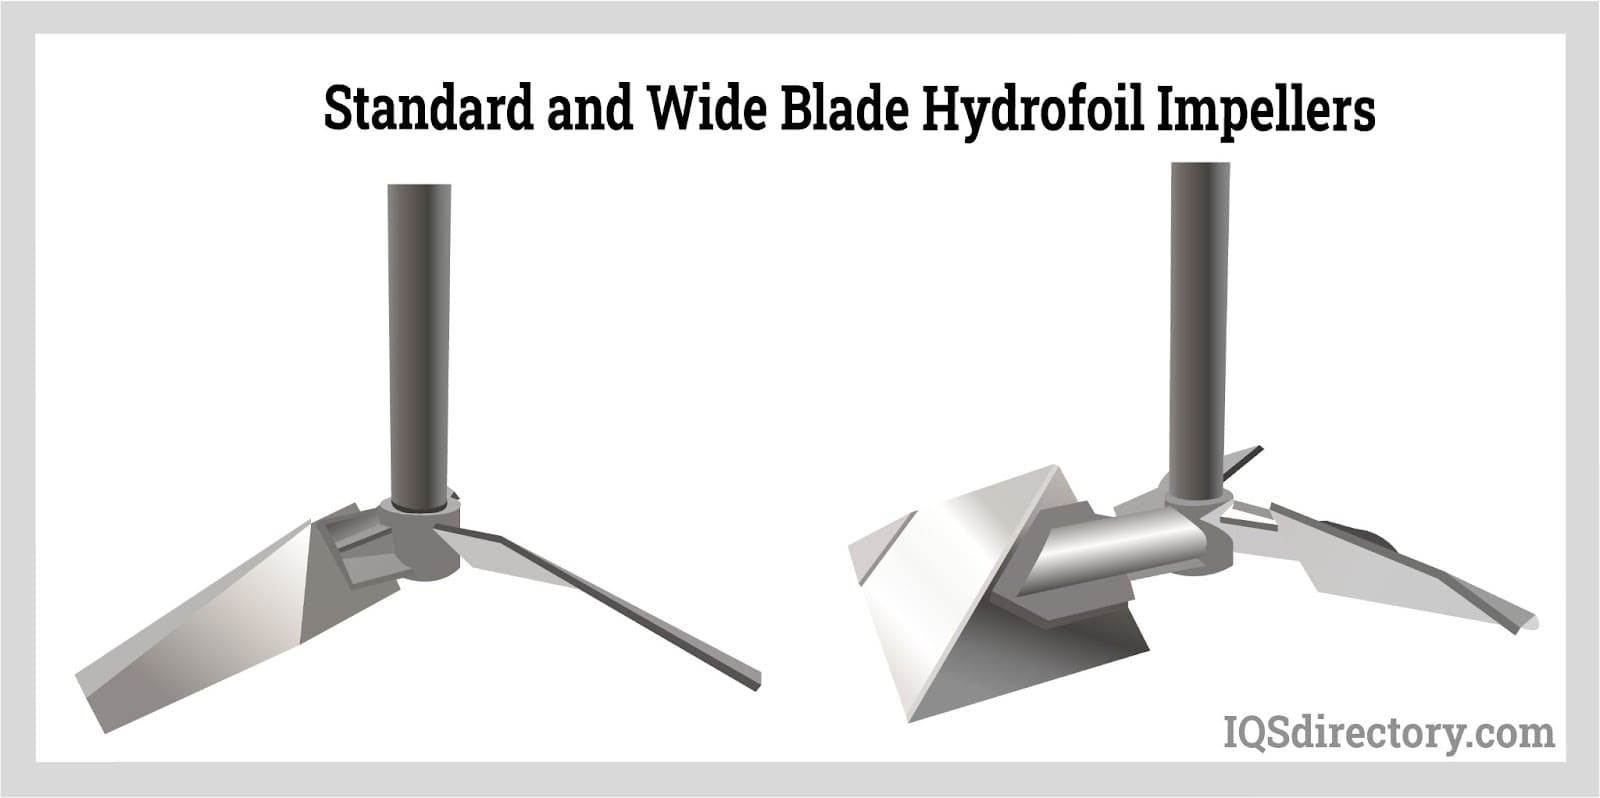 Standard and Wide Blade Hydrofoil Impellers